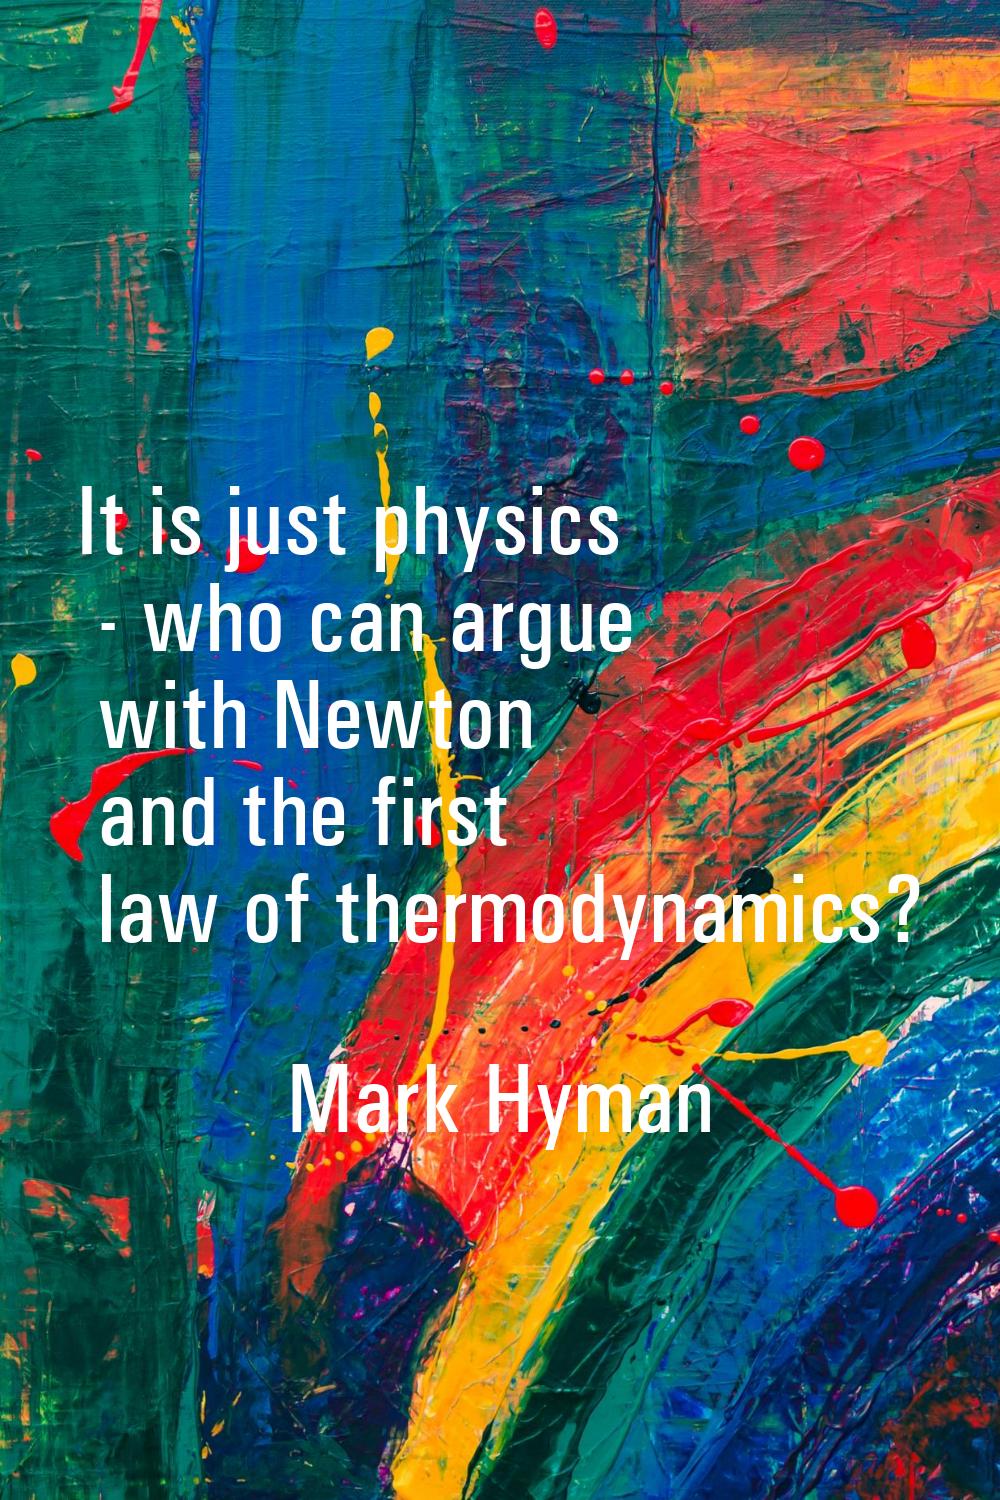 It is just physics - who can argue with Newton and the first law of thermodynamics?